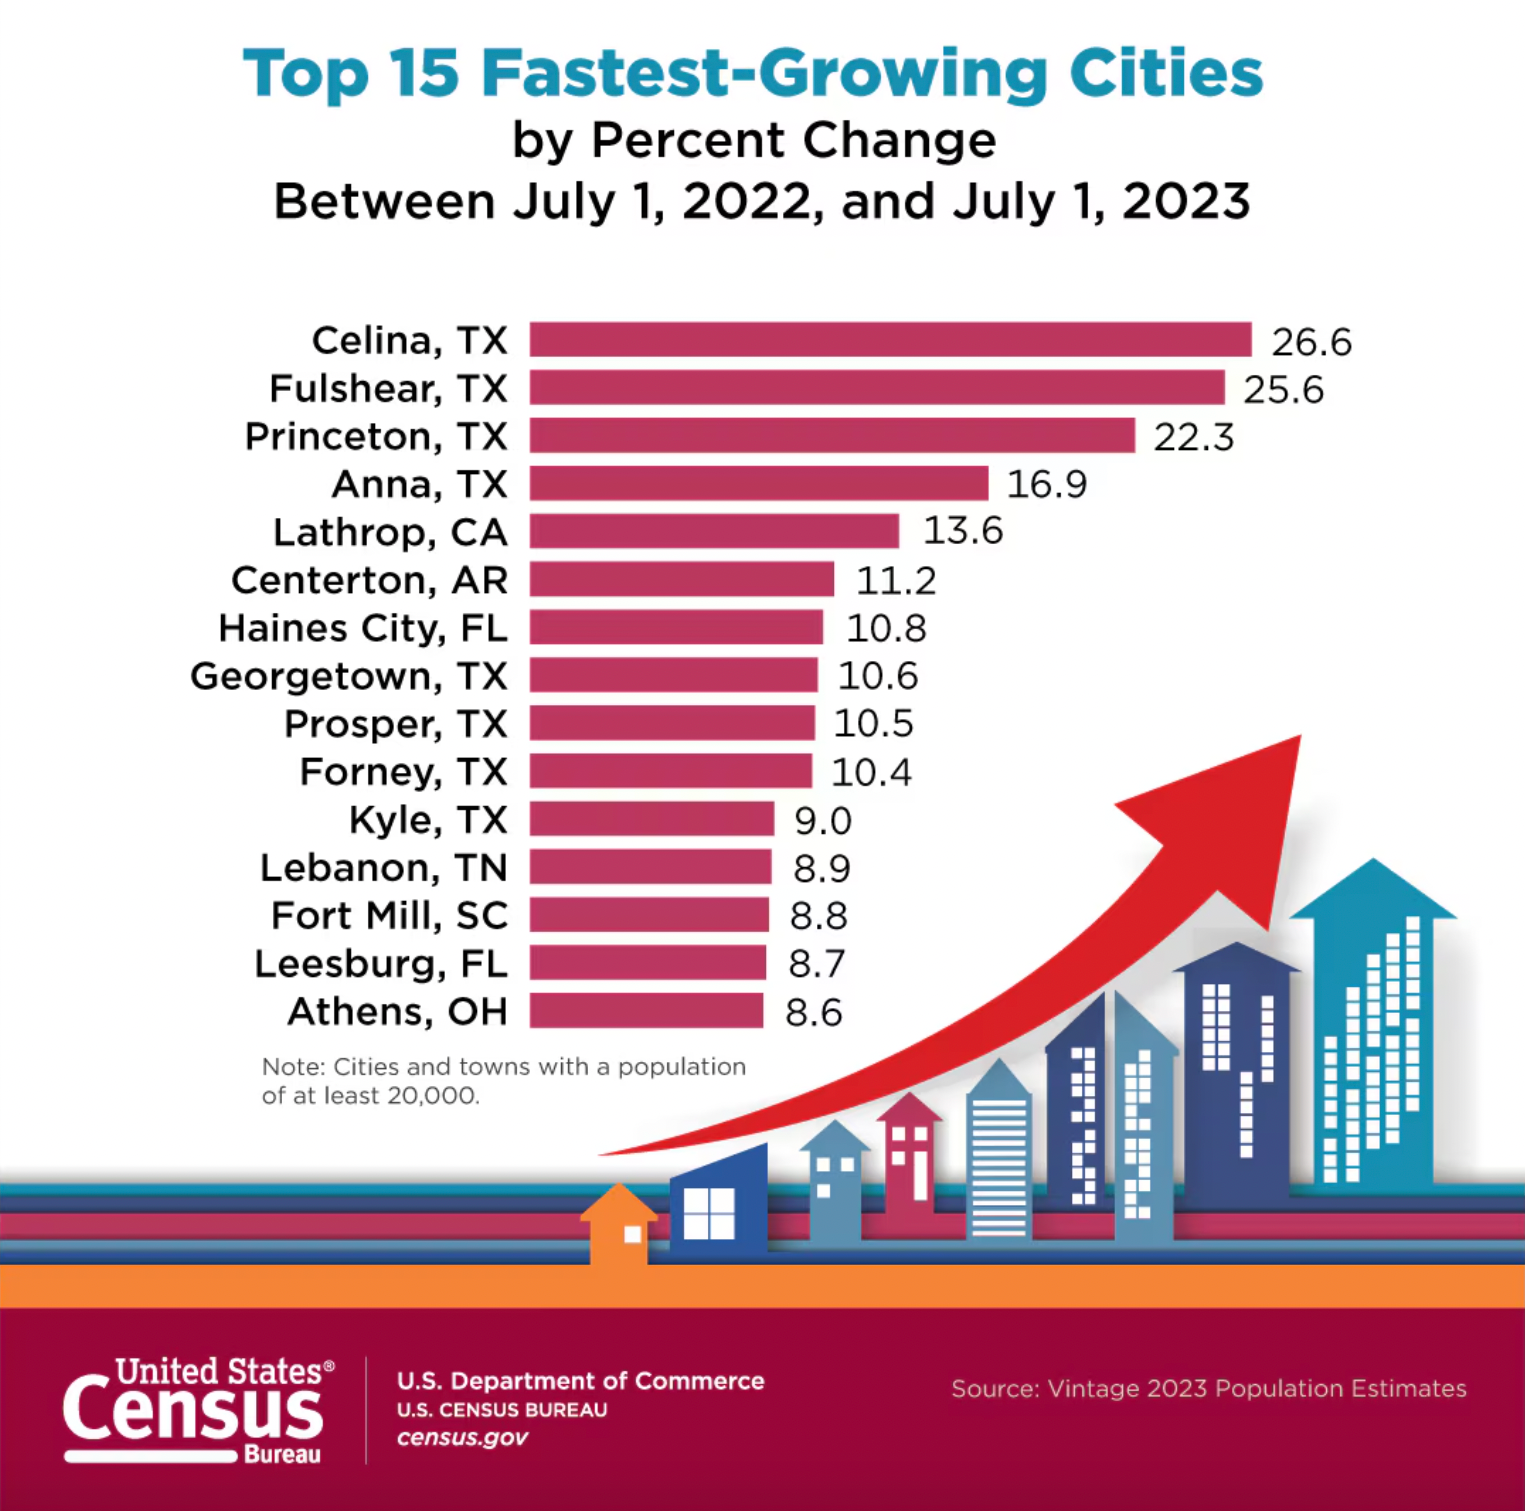 6 large cities in Ohio experienced population growth last year. Here they are